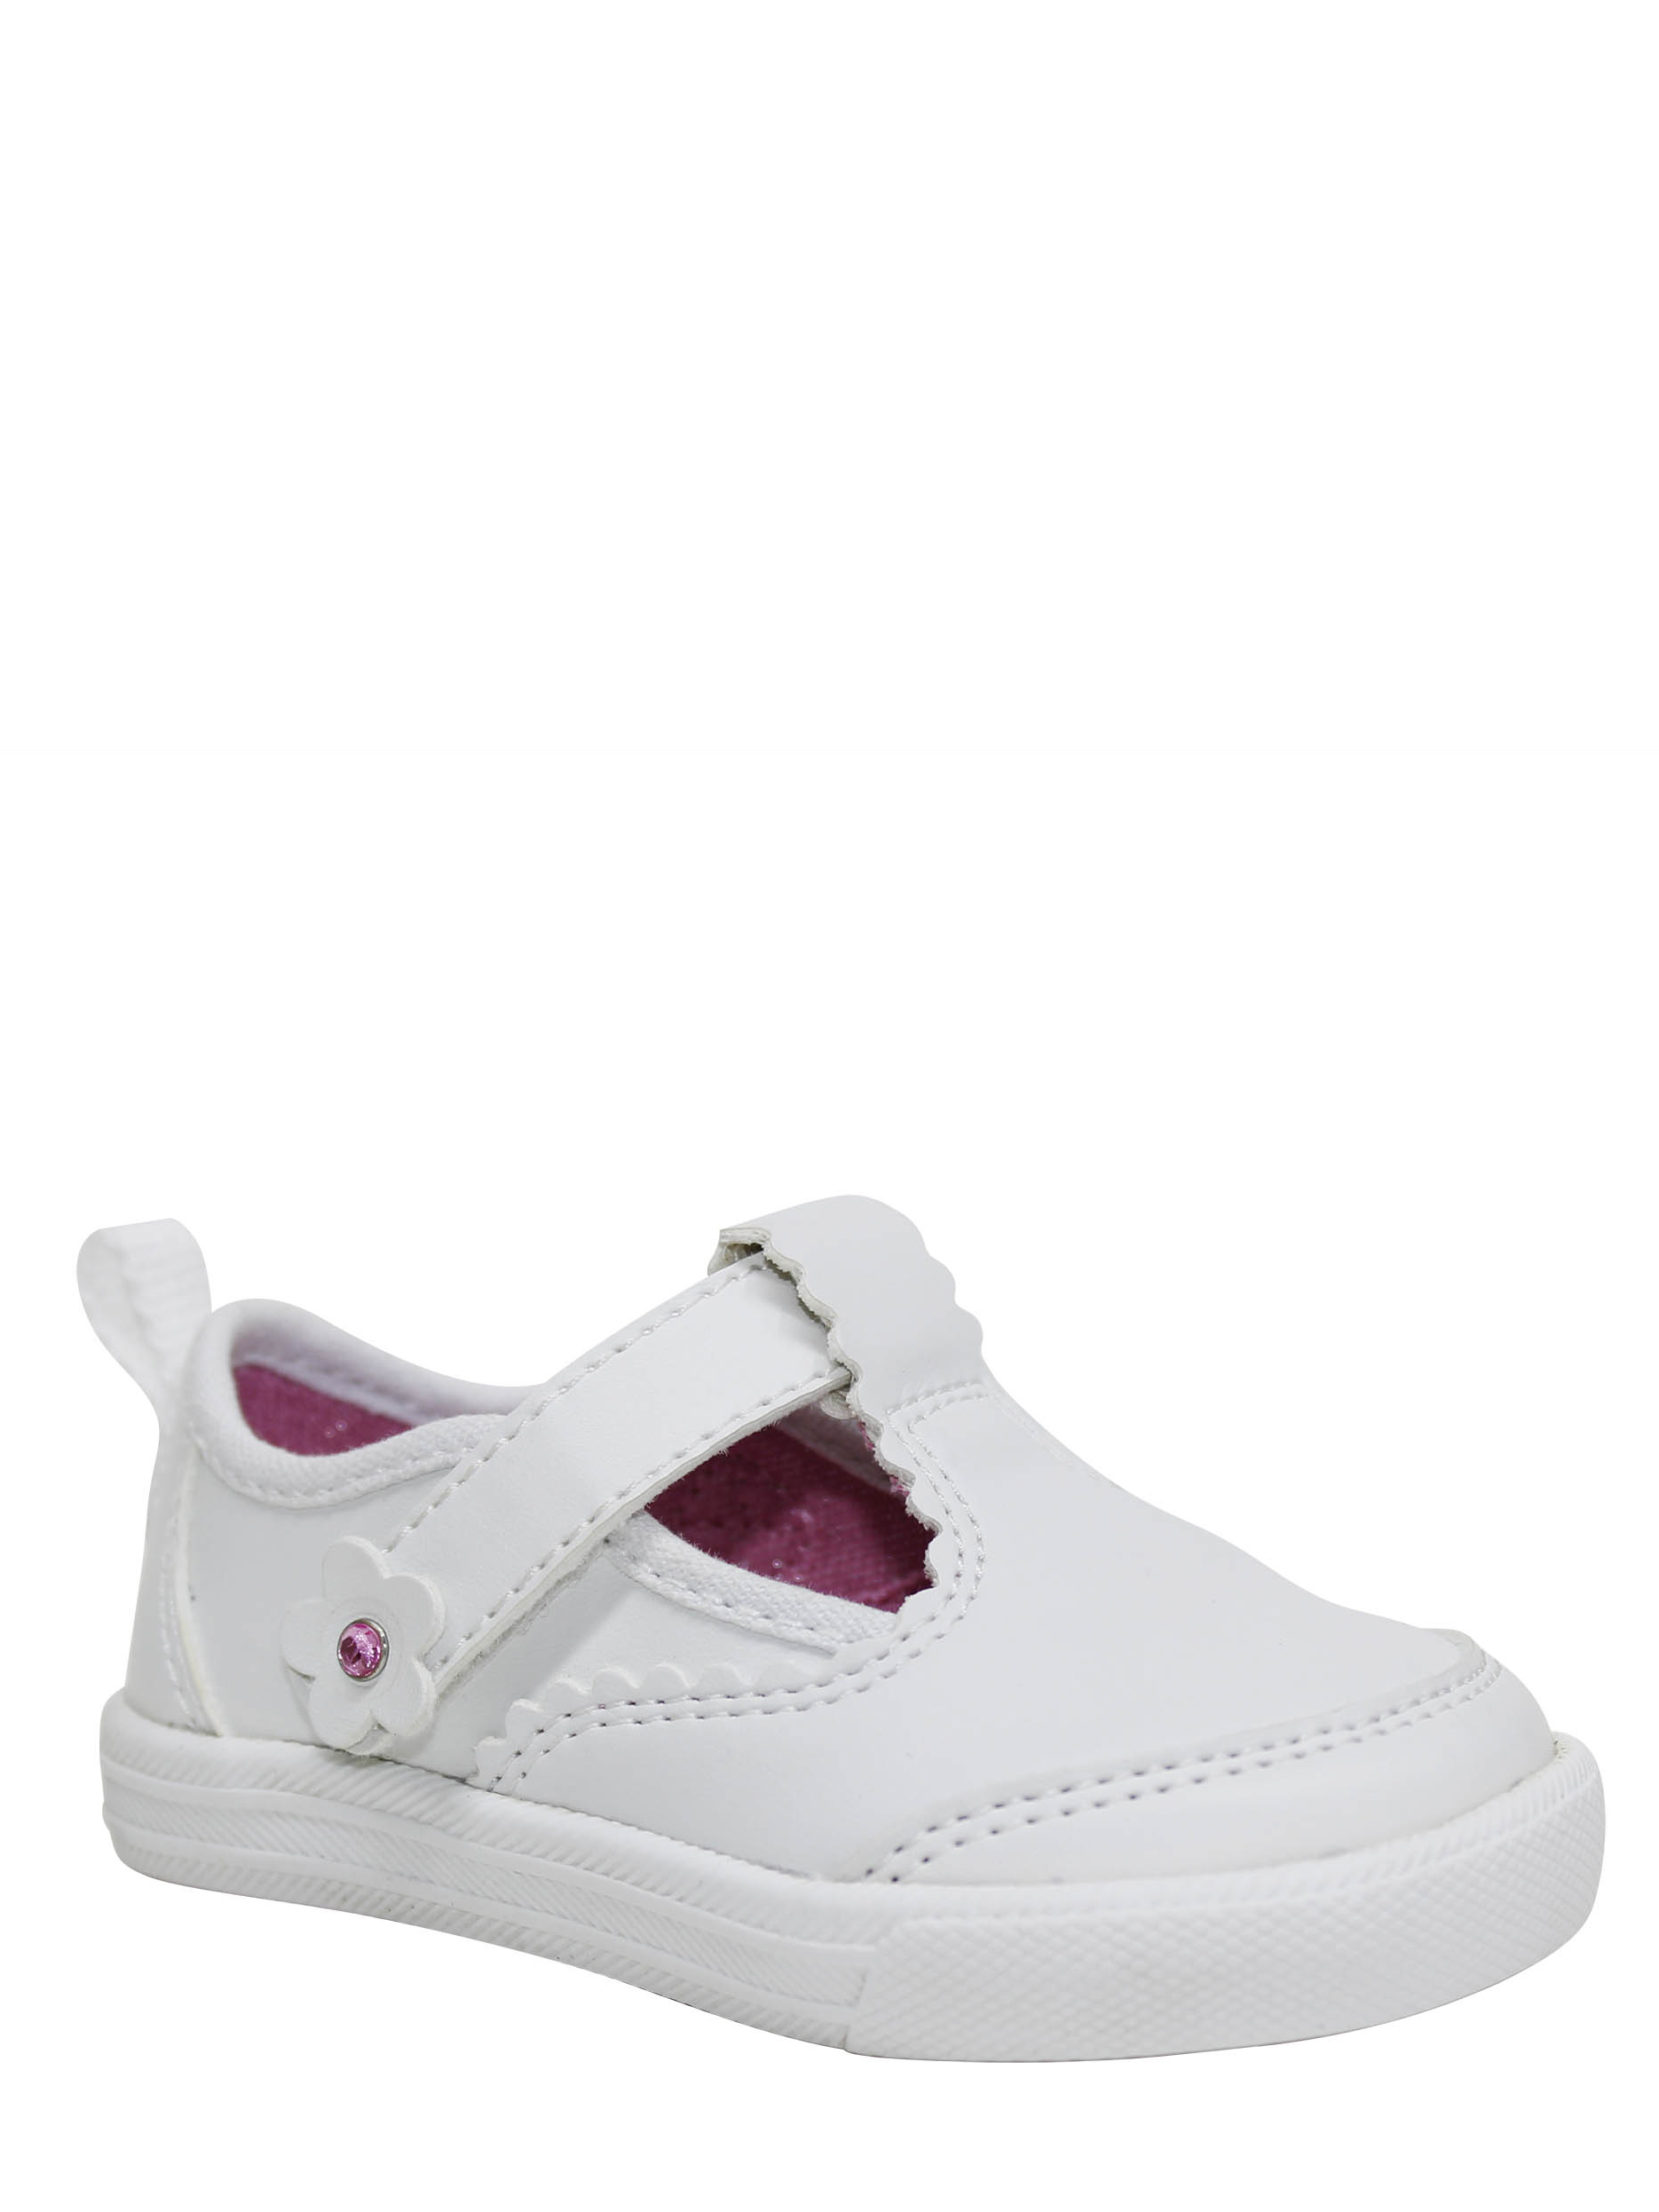 Infant Girl Garanimals Lauraie Casual shoes - image 1 of 6